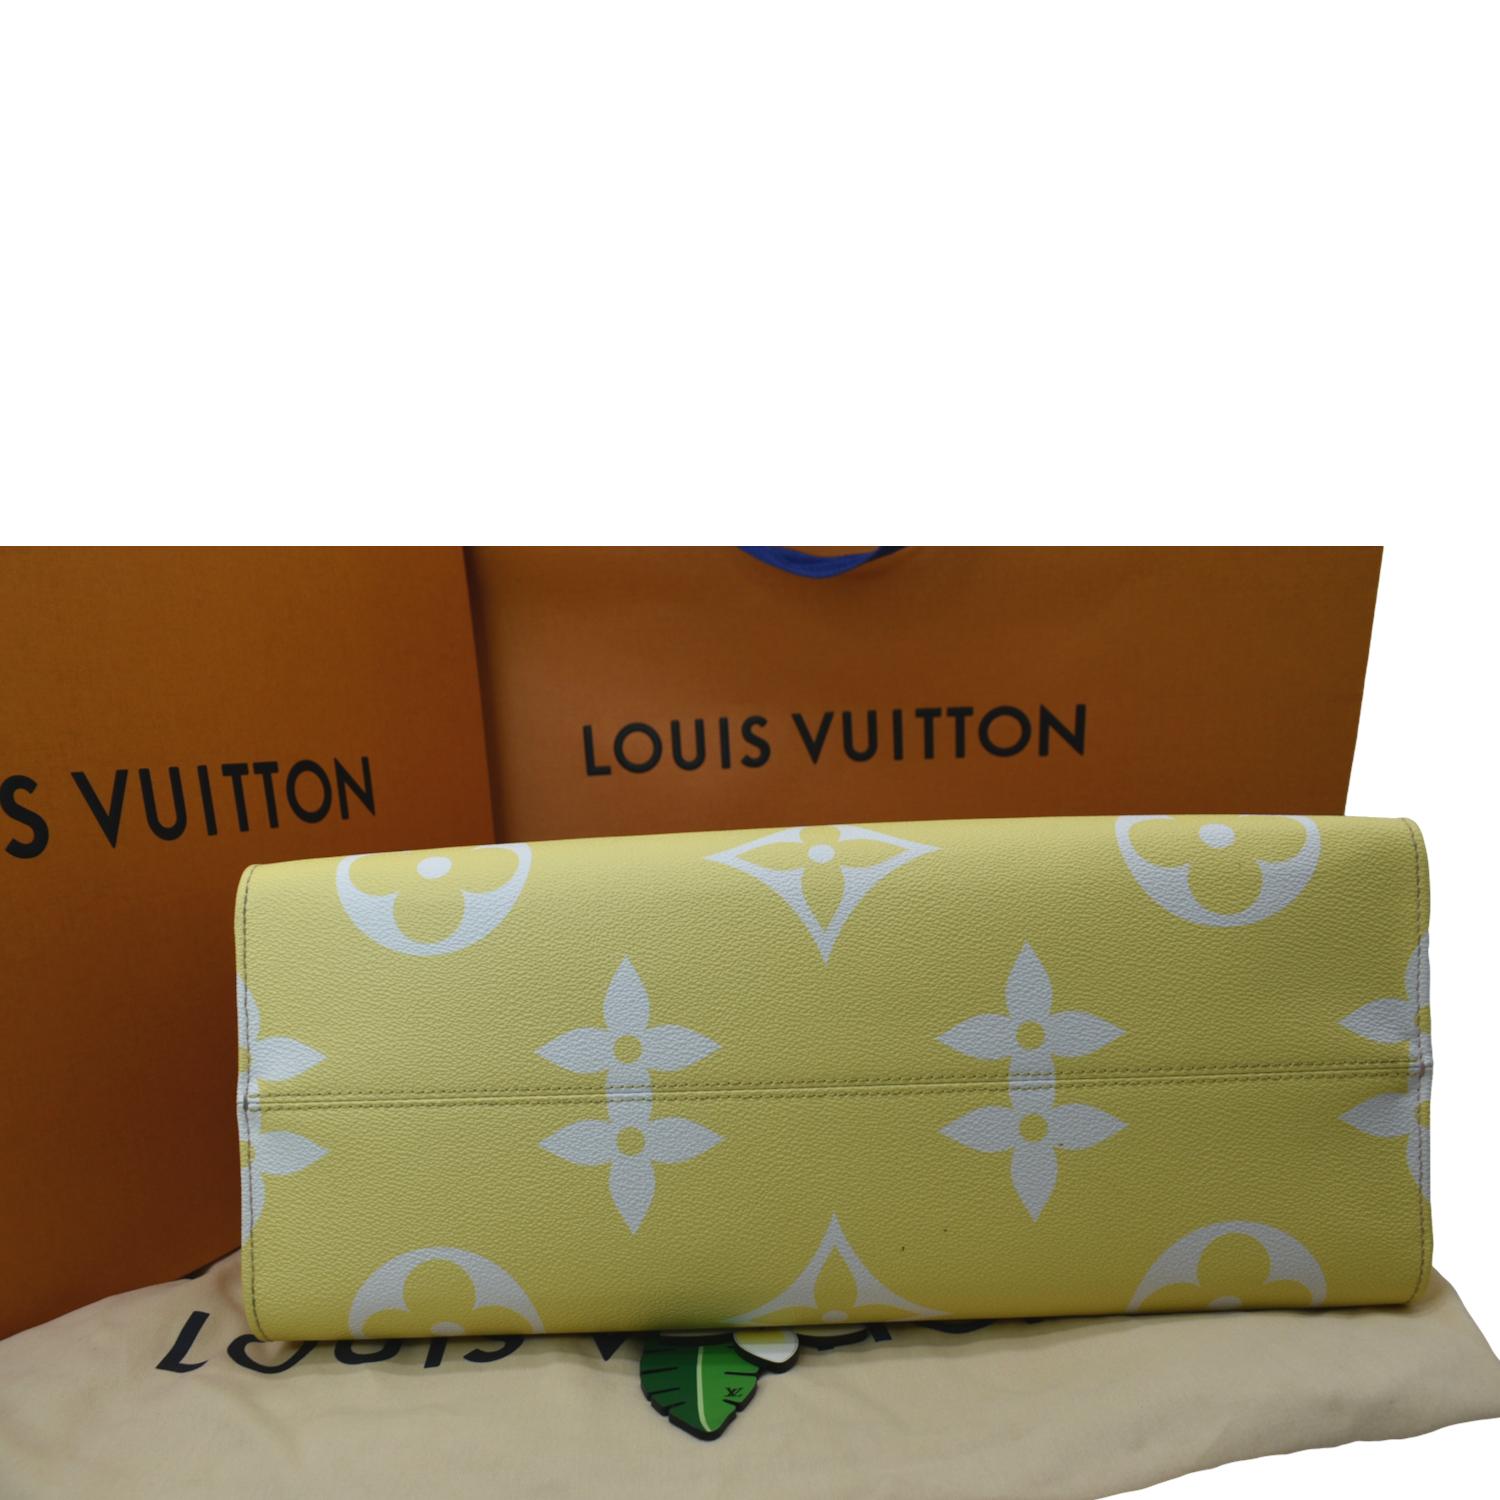 LOUIS VUITTON BY THE POOL ONTHEGO GM LIGHT PINK GIANT MONOGRAM NEW BAG